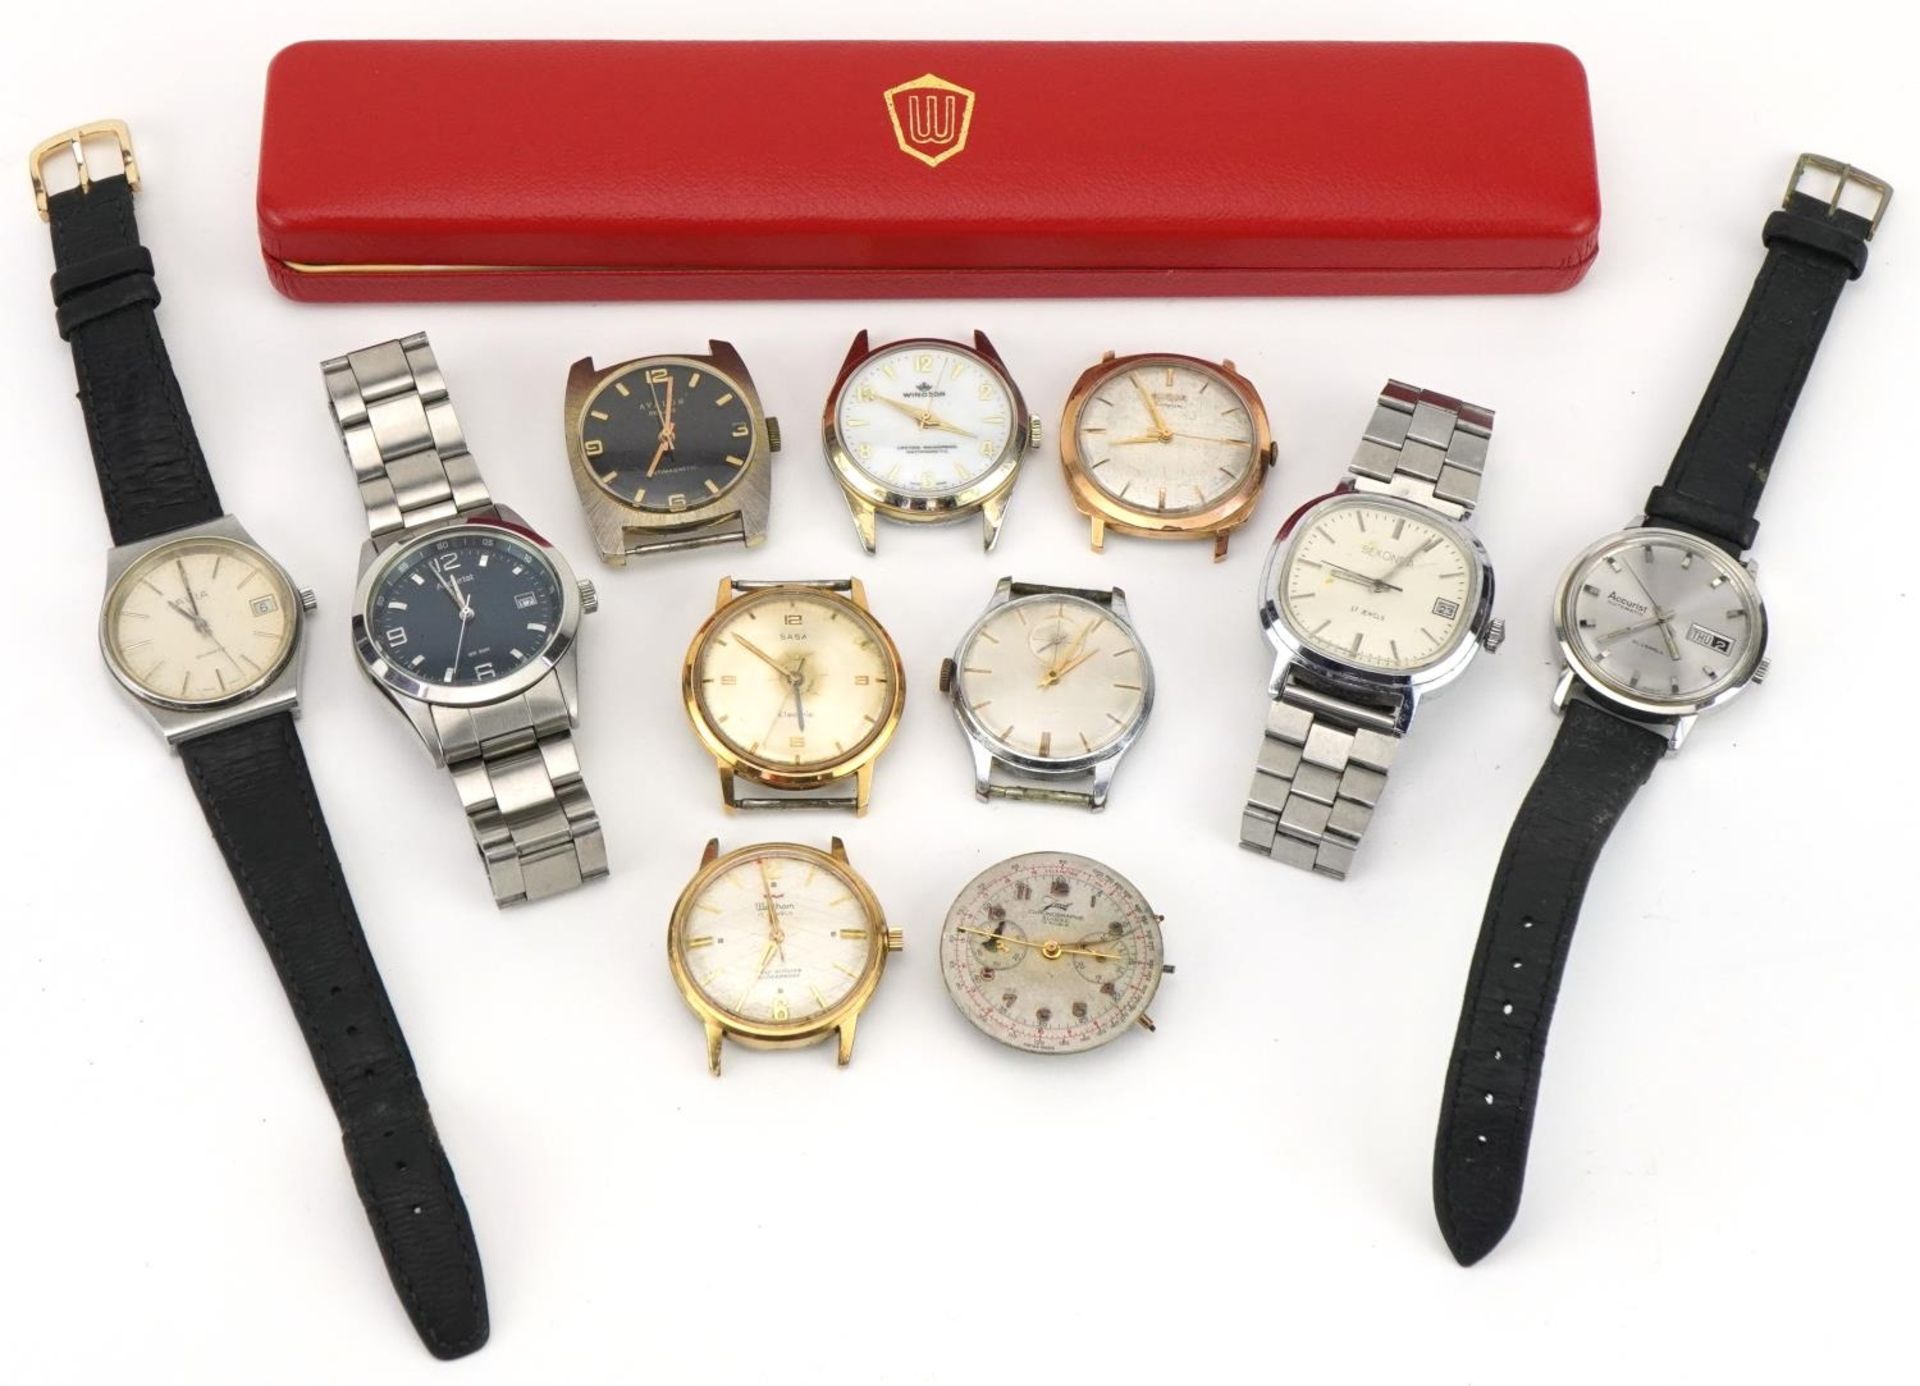 Eleven vintage gentlemen's wristwatches including Waltham, Singer, Avia, Accurist and Saga Electric,